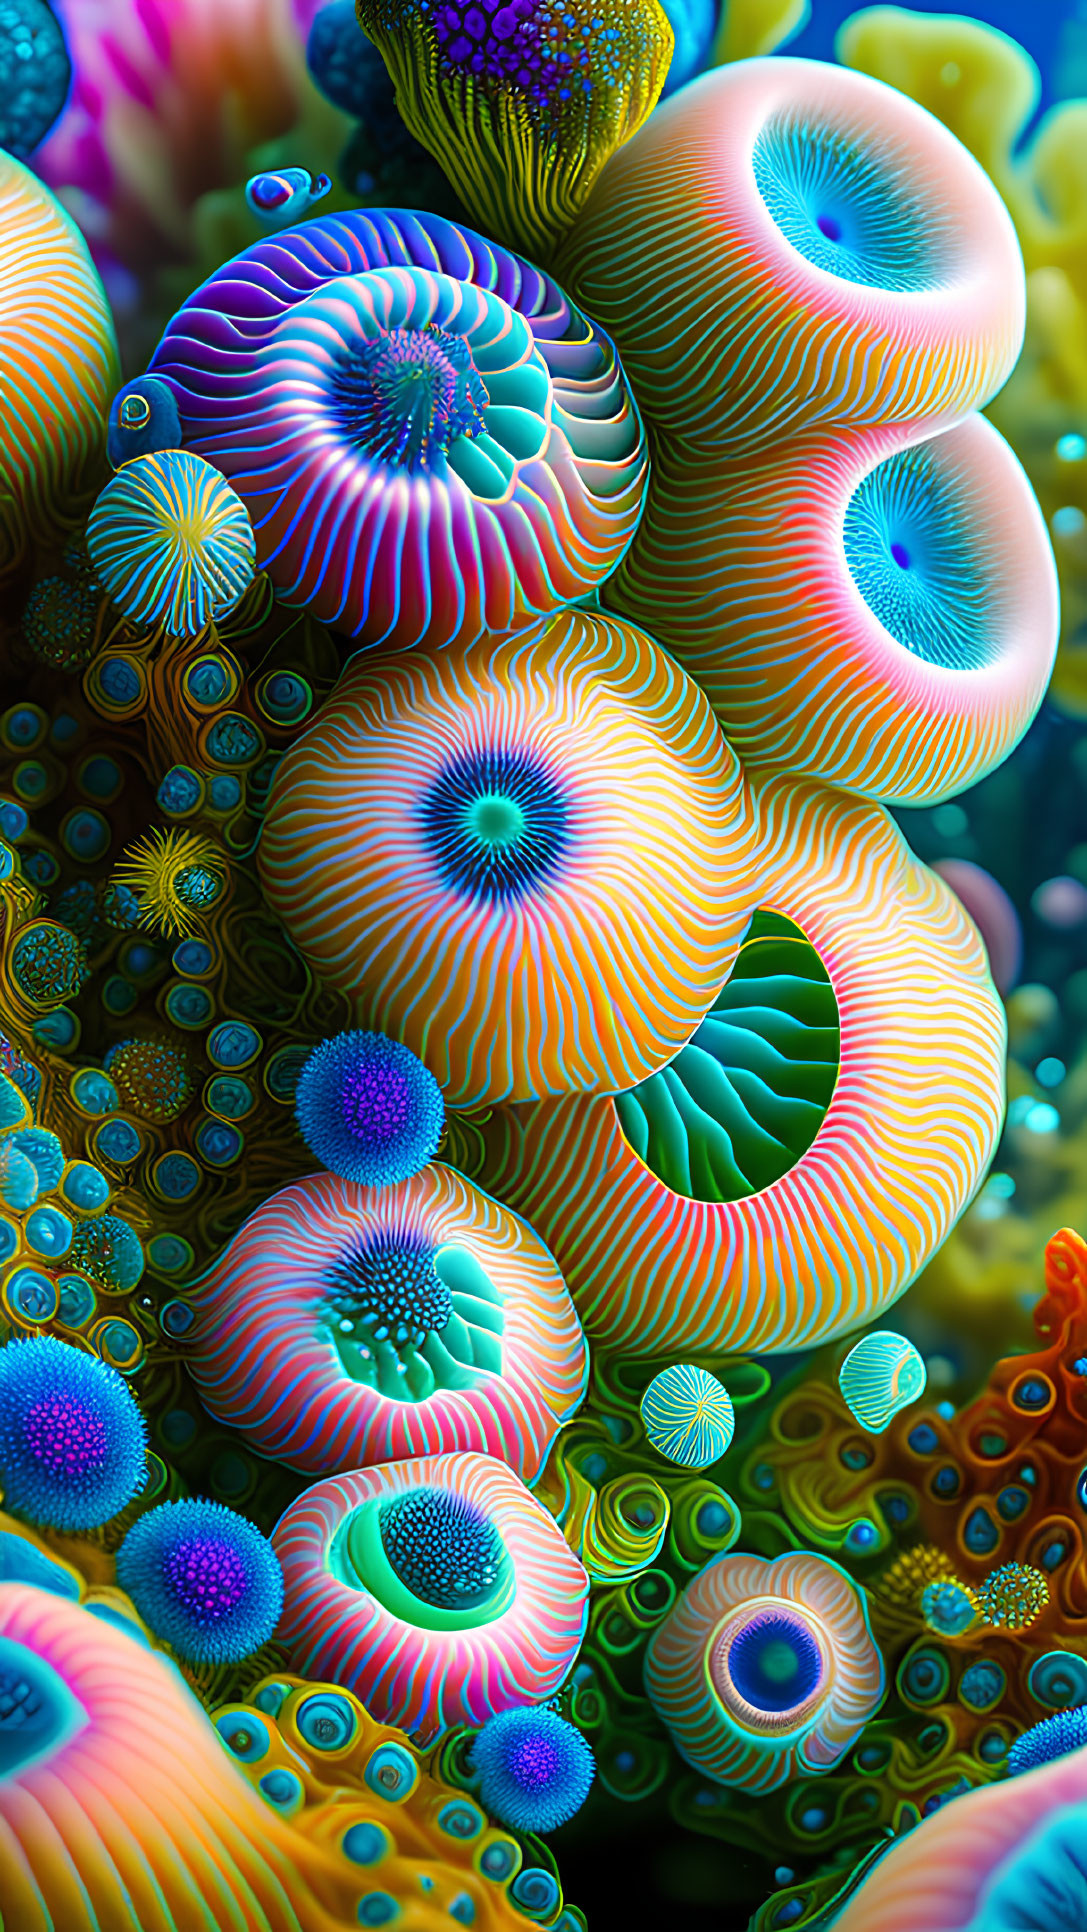 Abstract digital art: Vibrant sea anemone-like forms in iridescent colors